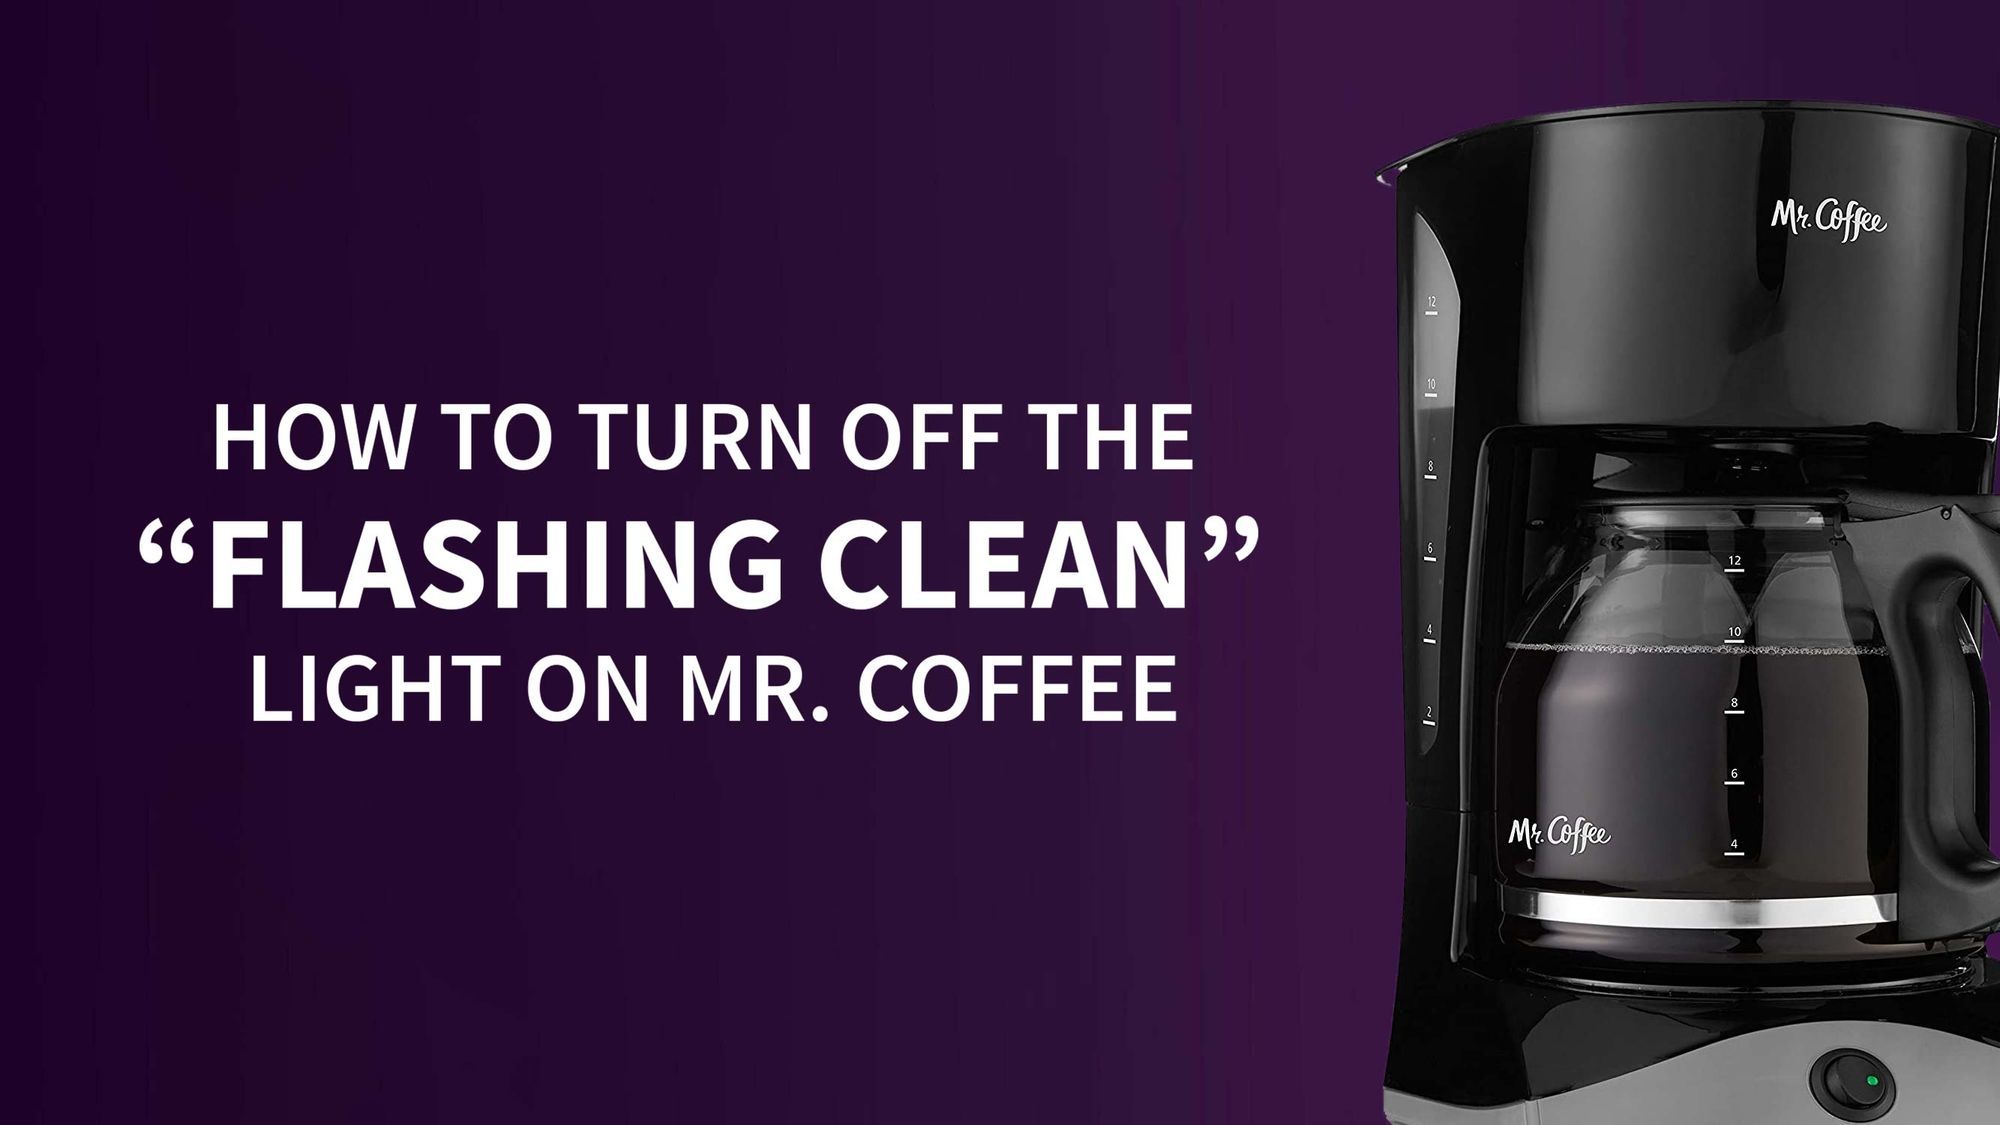 How to Turn Off the “Flashing Clean” Light on Mr. Coffee